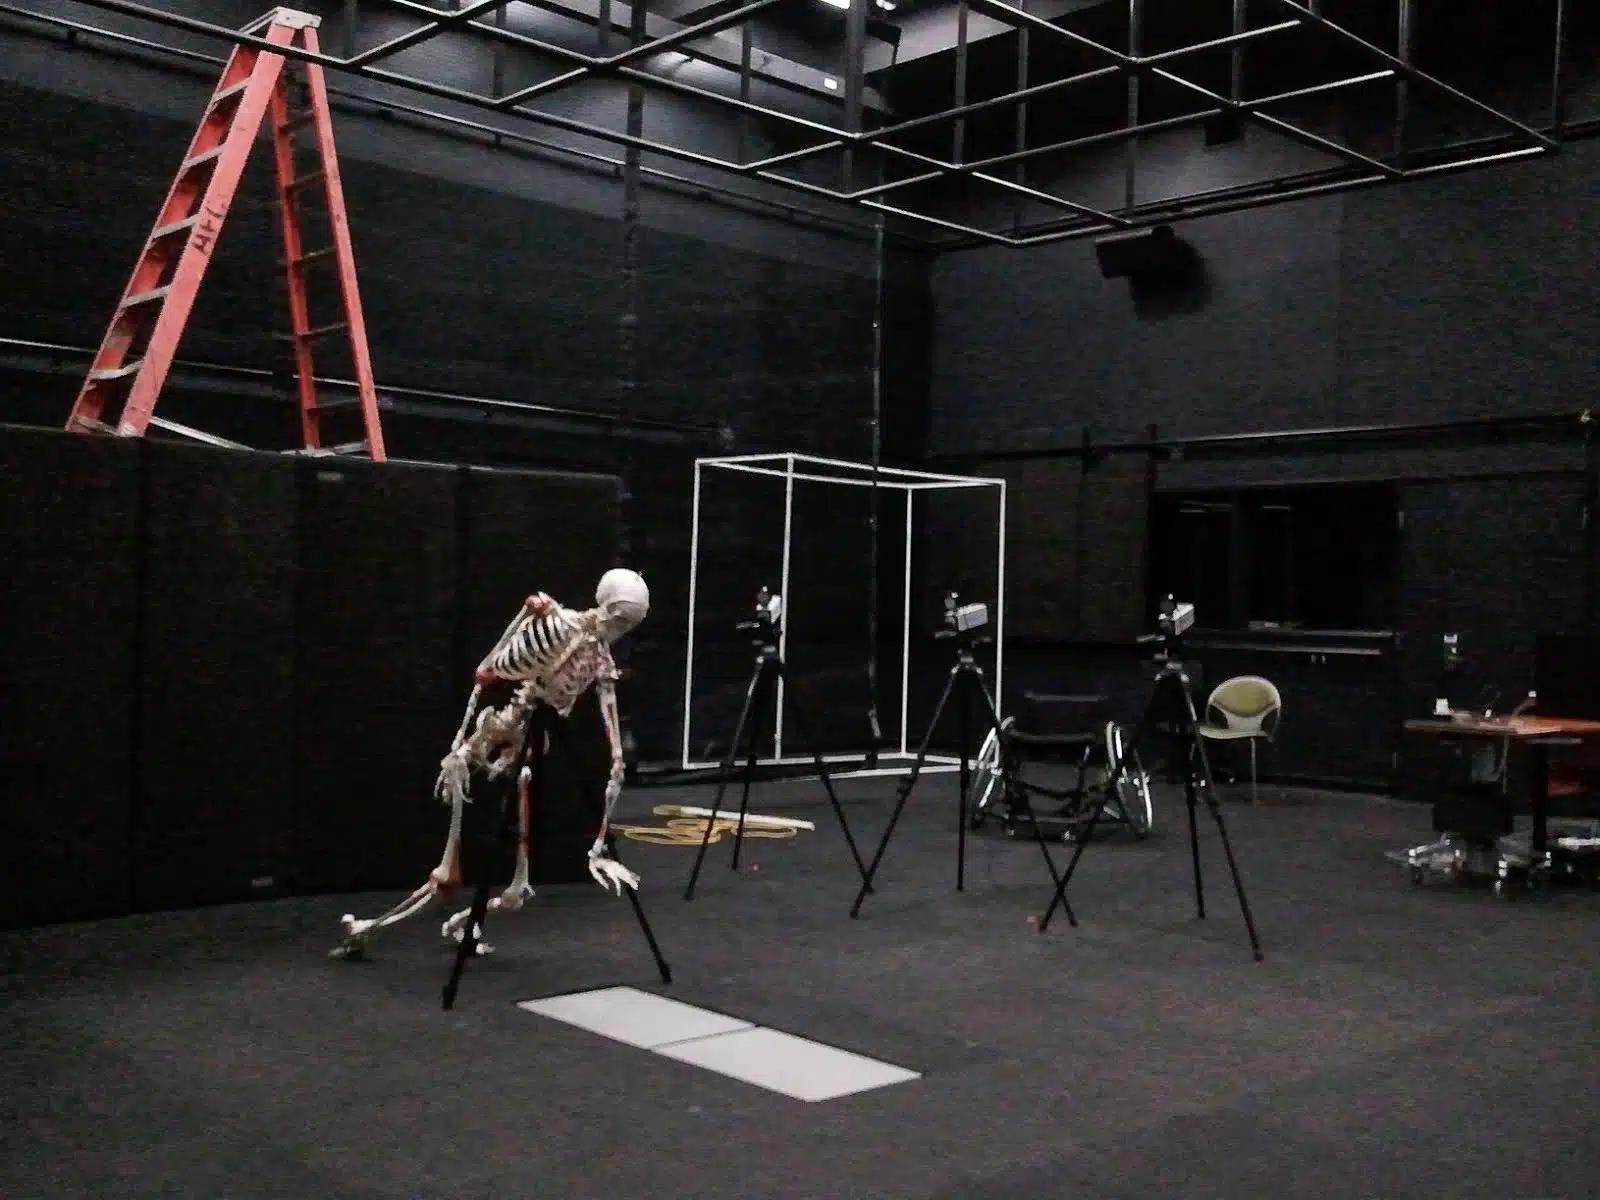 A skeleton hangs in a open room with cameras arranged for a photo shoot.